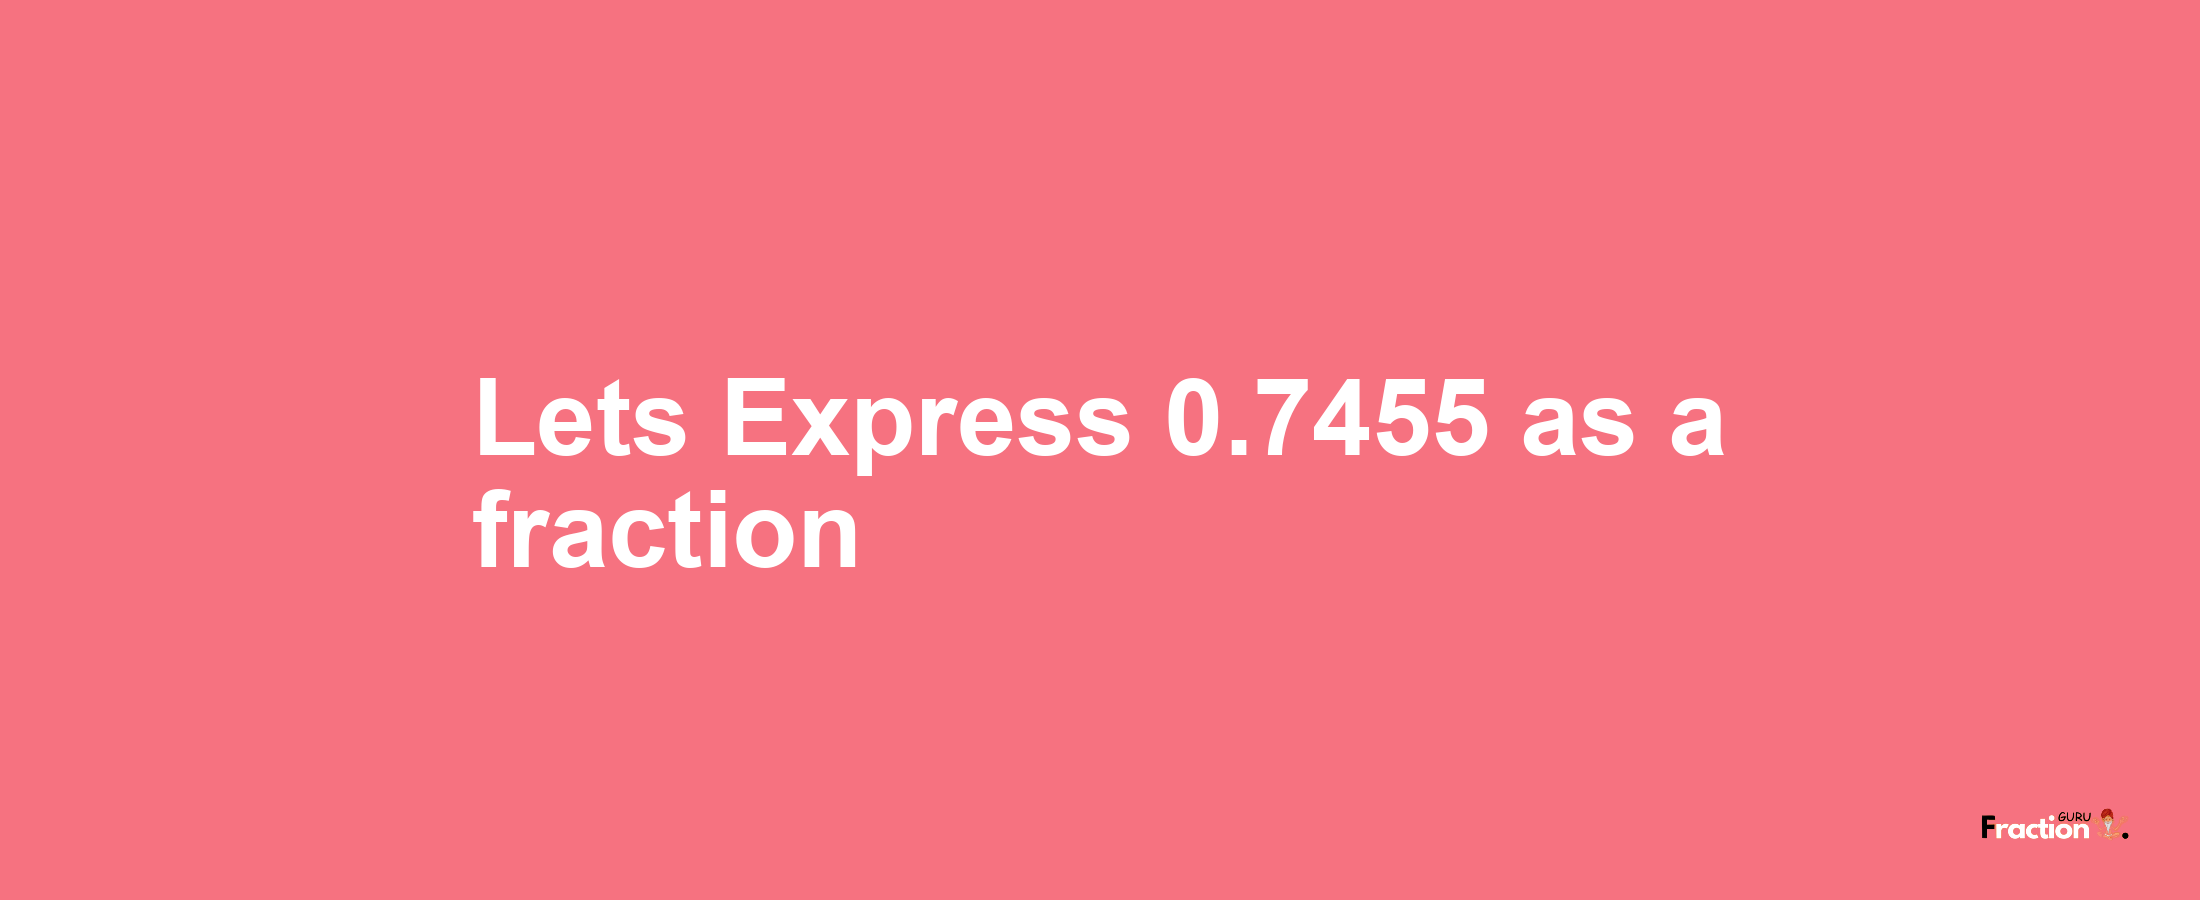 Lets Express 0.7455 as afraction